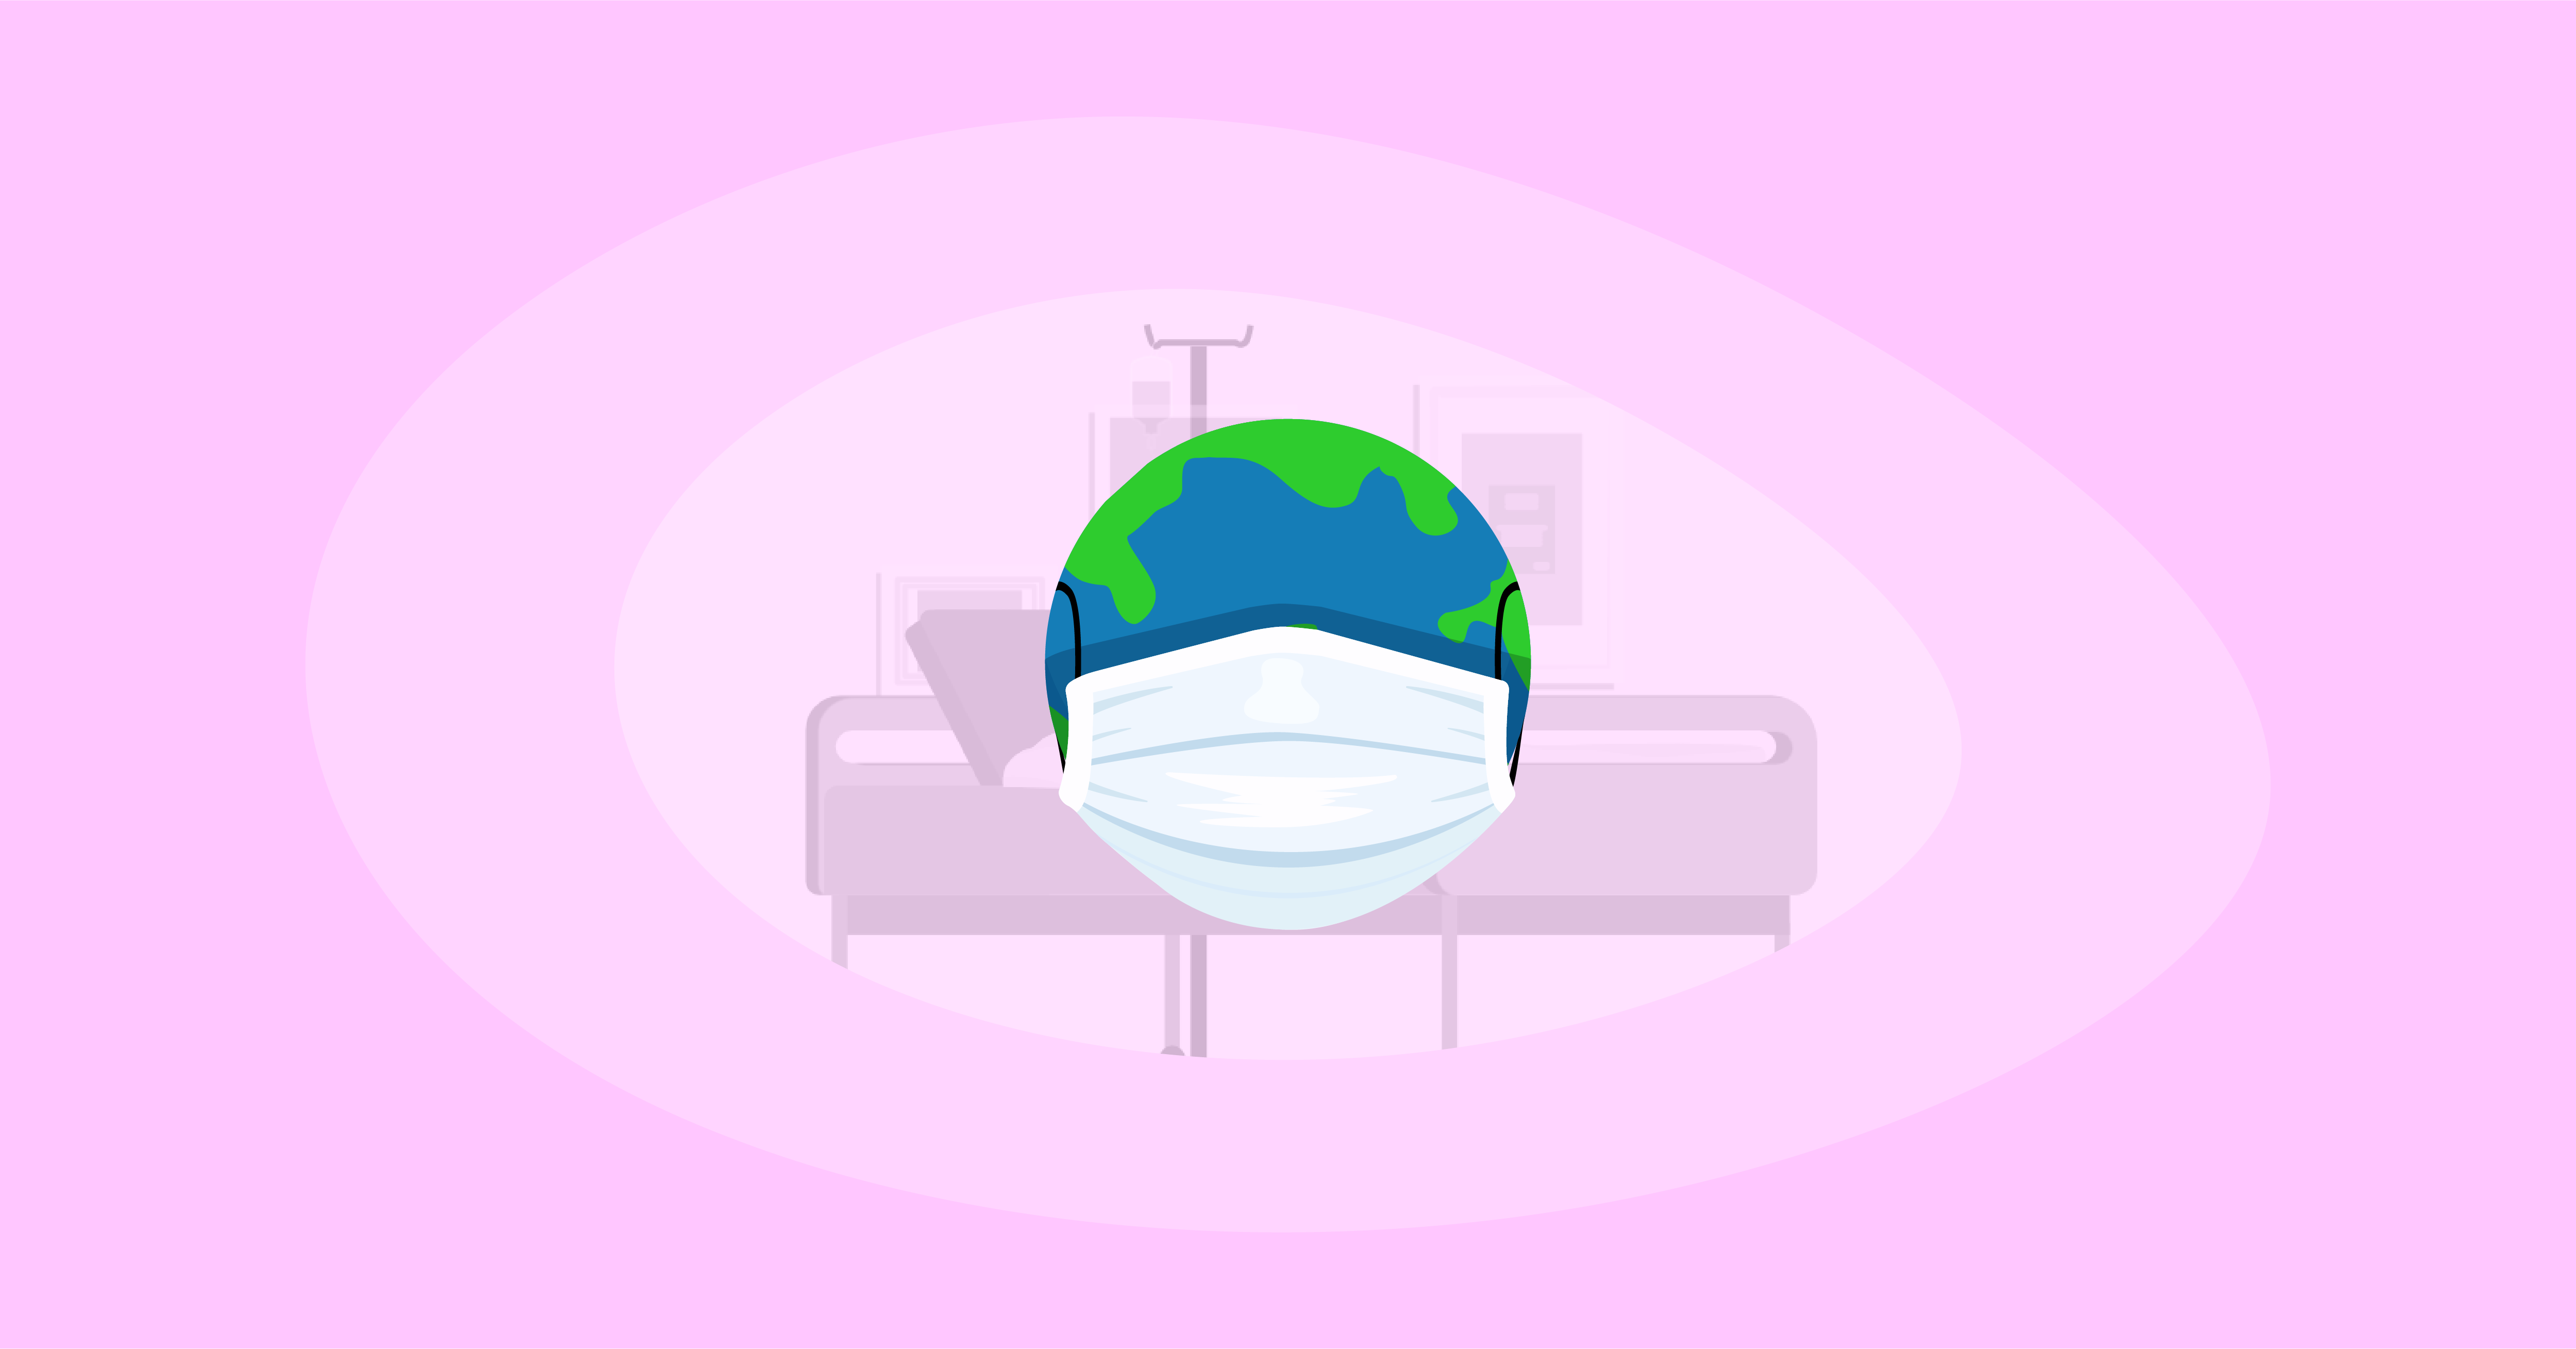 Illustration of a globe with a face mask as a symbol for COVID-19